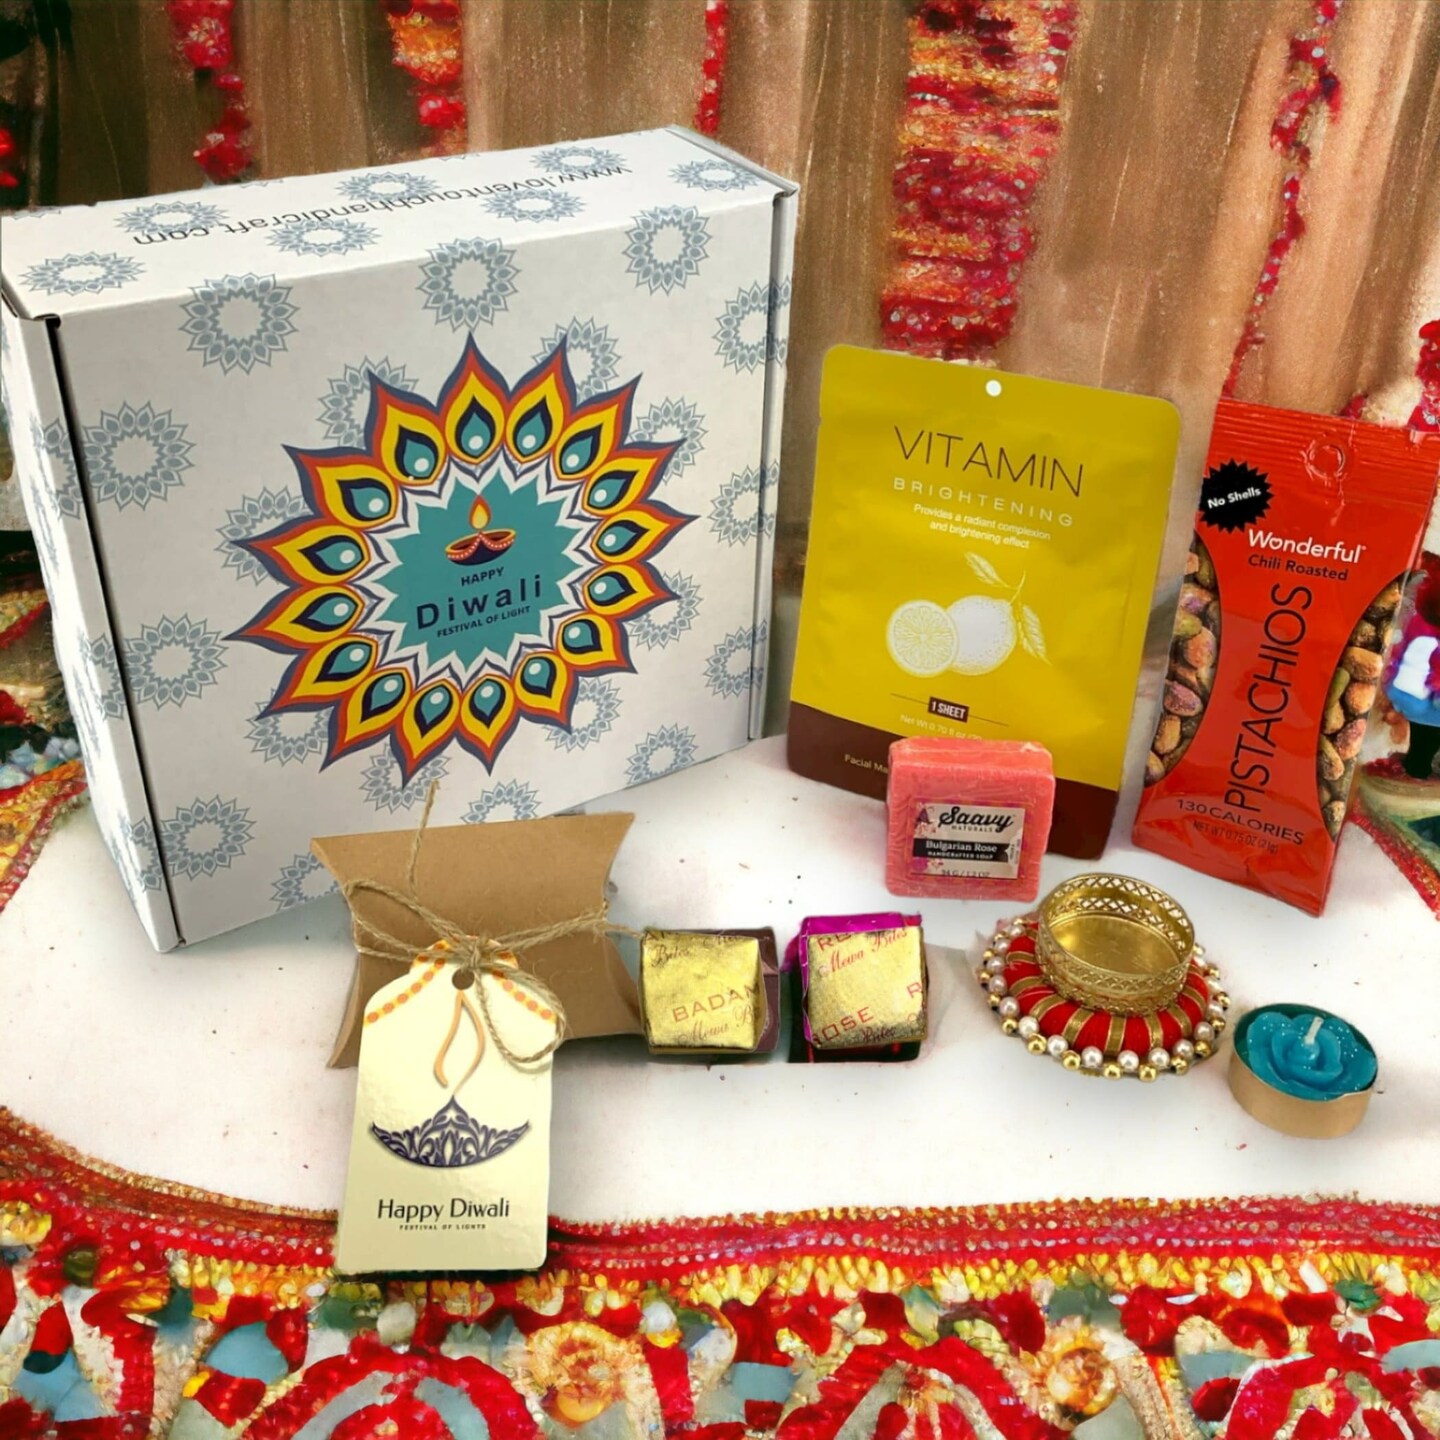 Personalized Diwali Gifts Hamper For Her Indian Diwali Gift Boxes Navratri Gift Box Hamper Basket Sweets Dry Fruits For Employees Home Office Friends Family Handmade Return Gifts Items